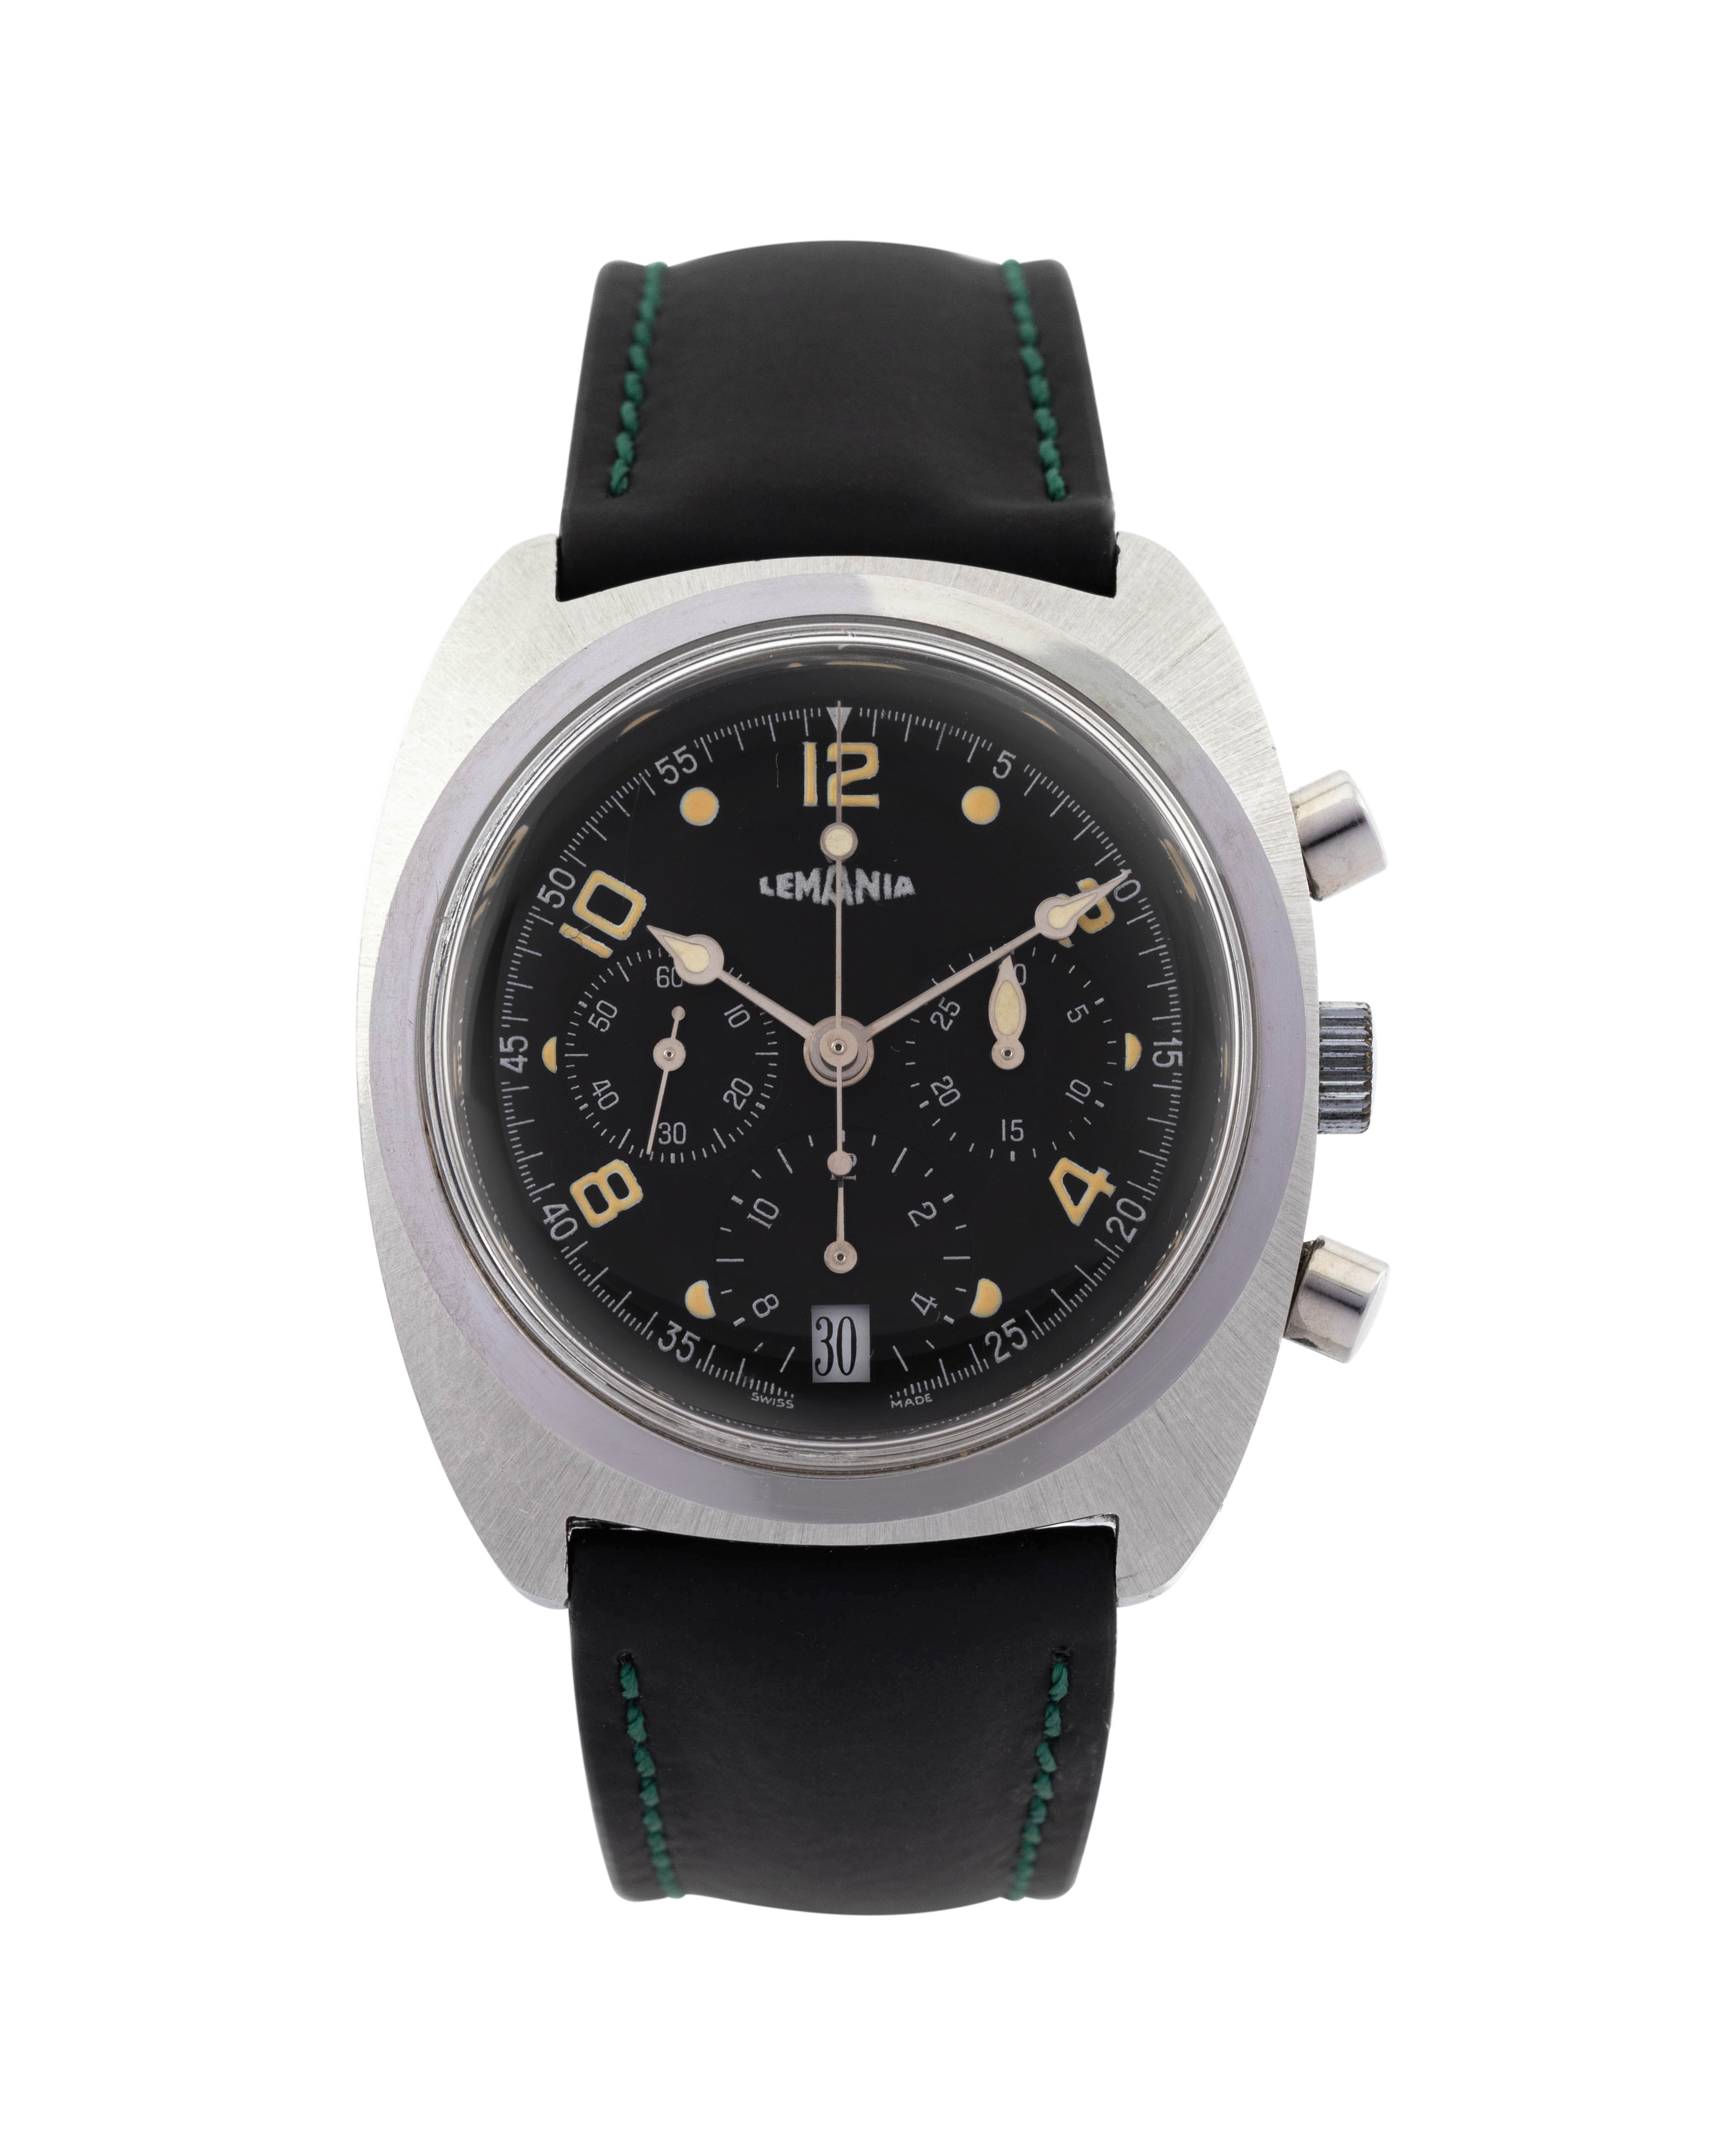 Lemania Chronograph wrist watch in stainless, black dial 